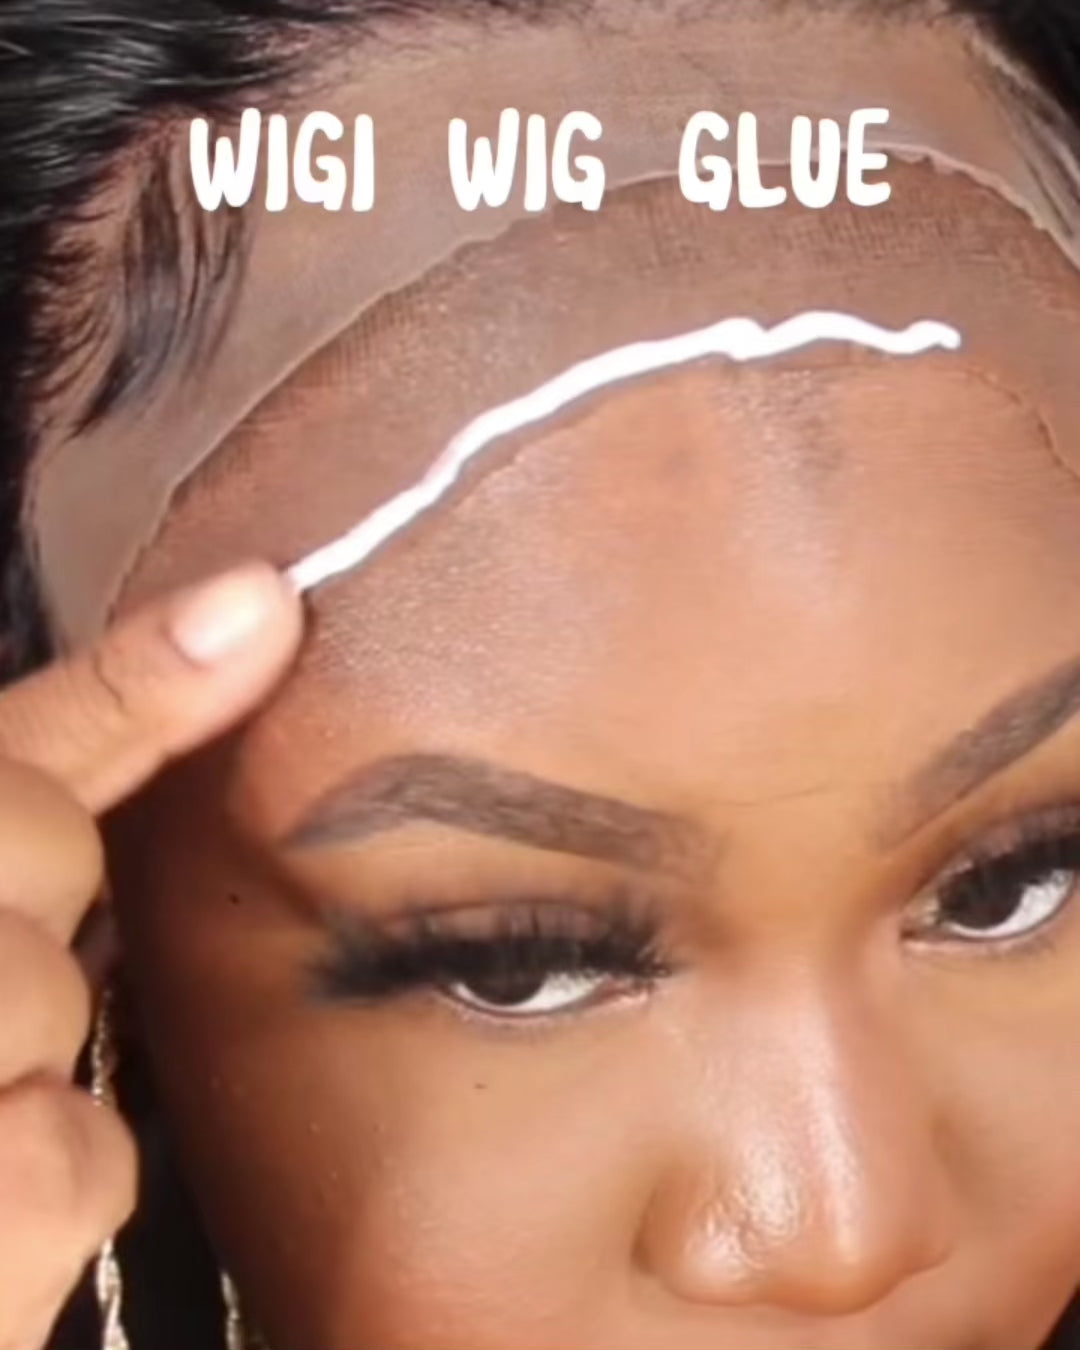 wig glue; lace glue; tape in extension remover; tape in remover; wig glue remover; lace glue remover; hair glue remover; tape in hair extension remover; hair extension remover; tape extension remover; bold hold lace glue remover; bond remover; wig glue; lace front glue; frontal glue; adhesive lace glue; hair piece glue; invisible hair glue; bond glue for lace wigs; wig glue for front lace wig waterproof; lace wig glue; hair glue; lace glue for wigs; bold hold lace glue